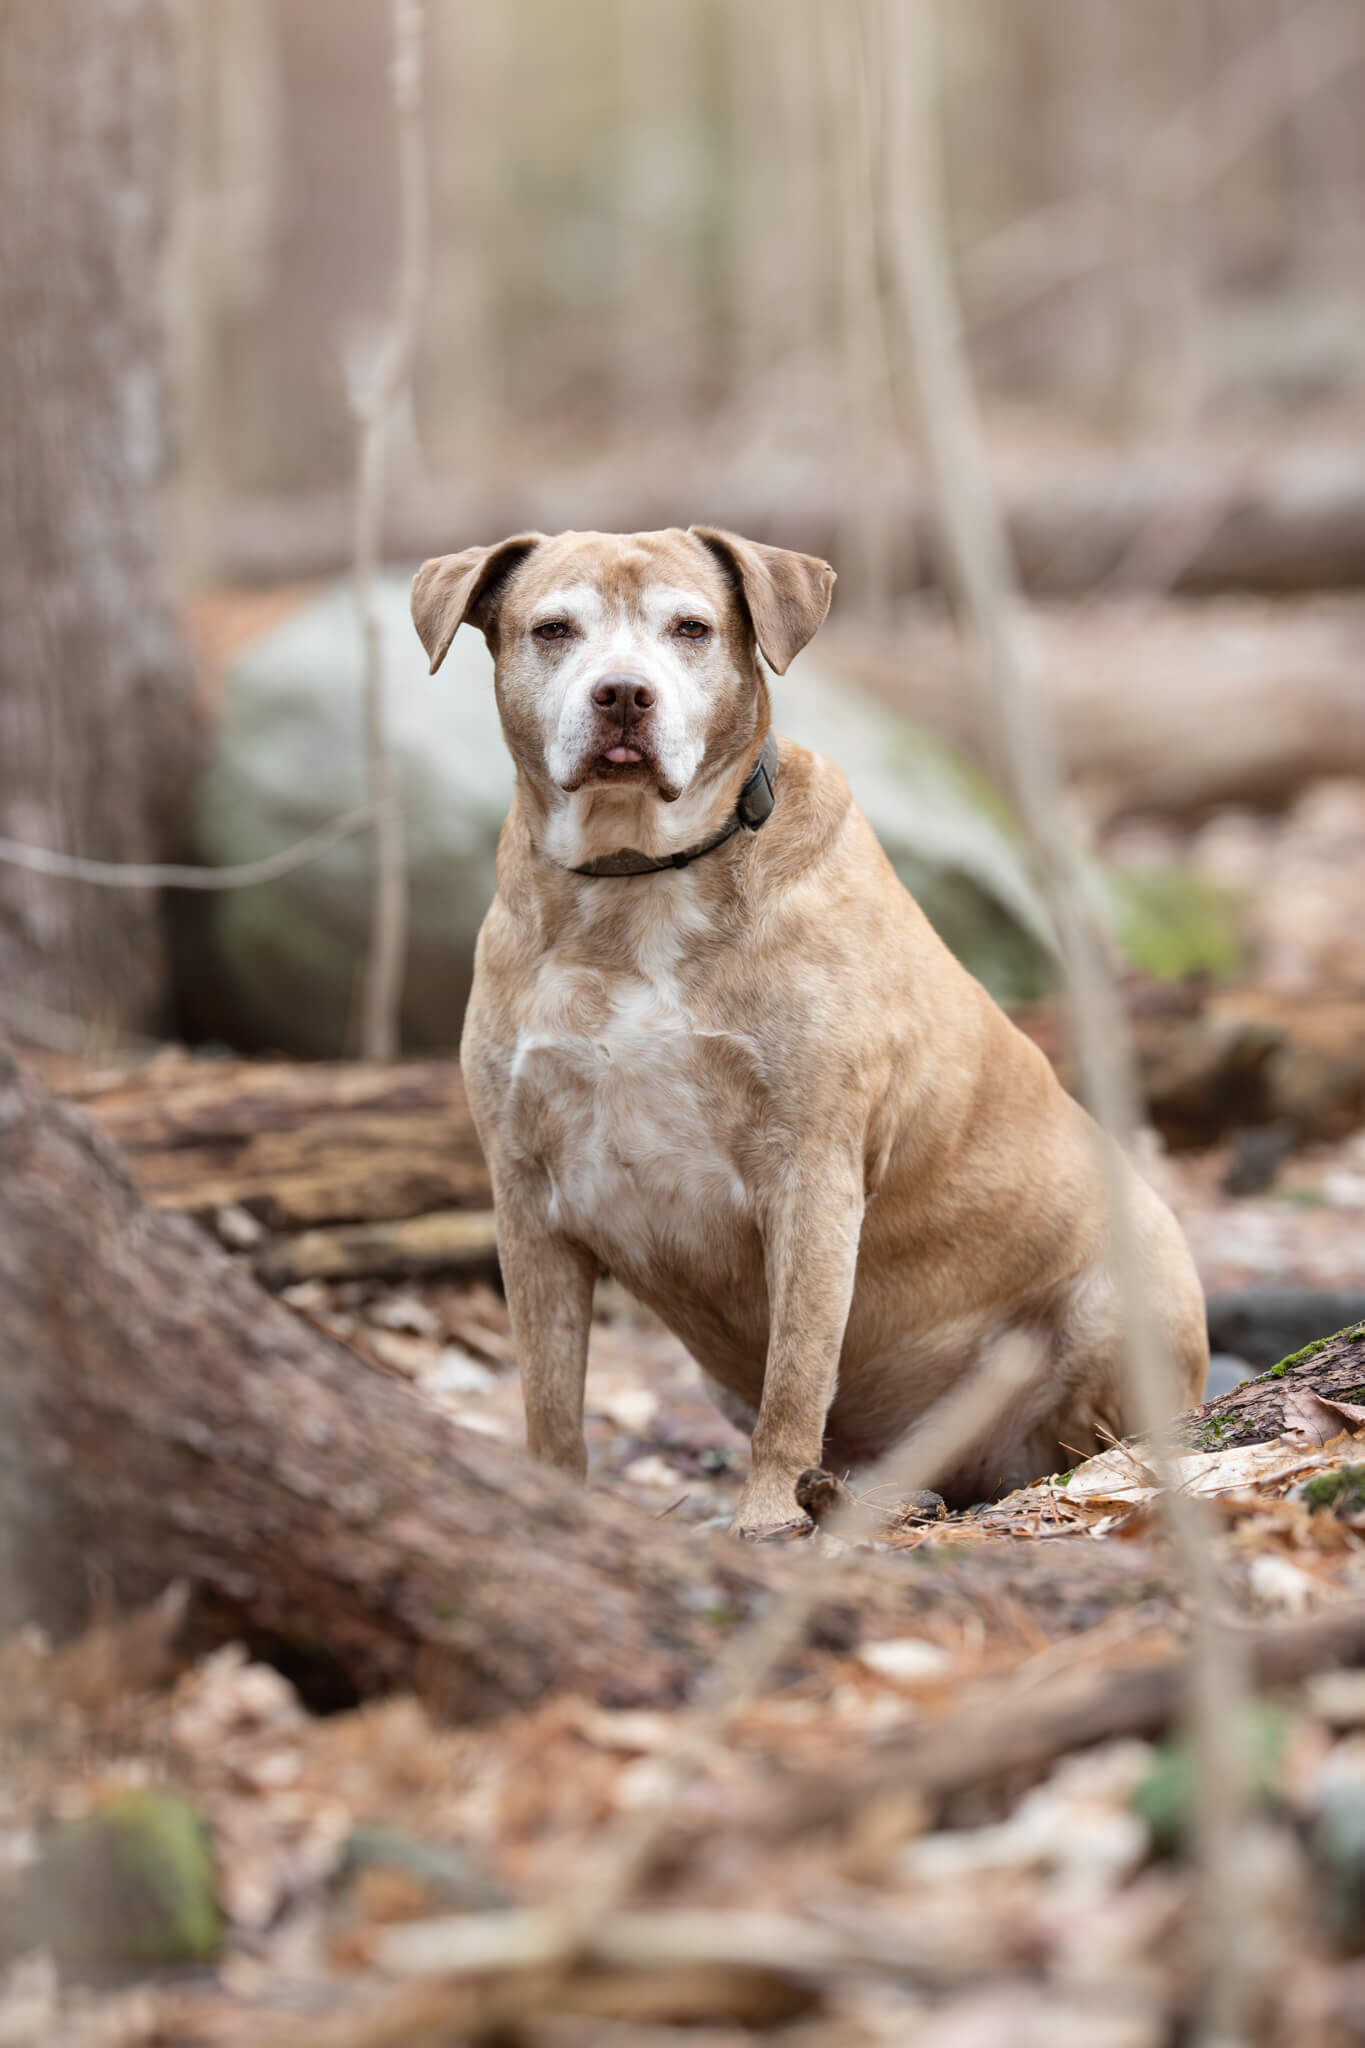 Older tan dog sits in the forest surrounded by fallen leaves questions to ask when adopting a dog